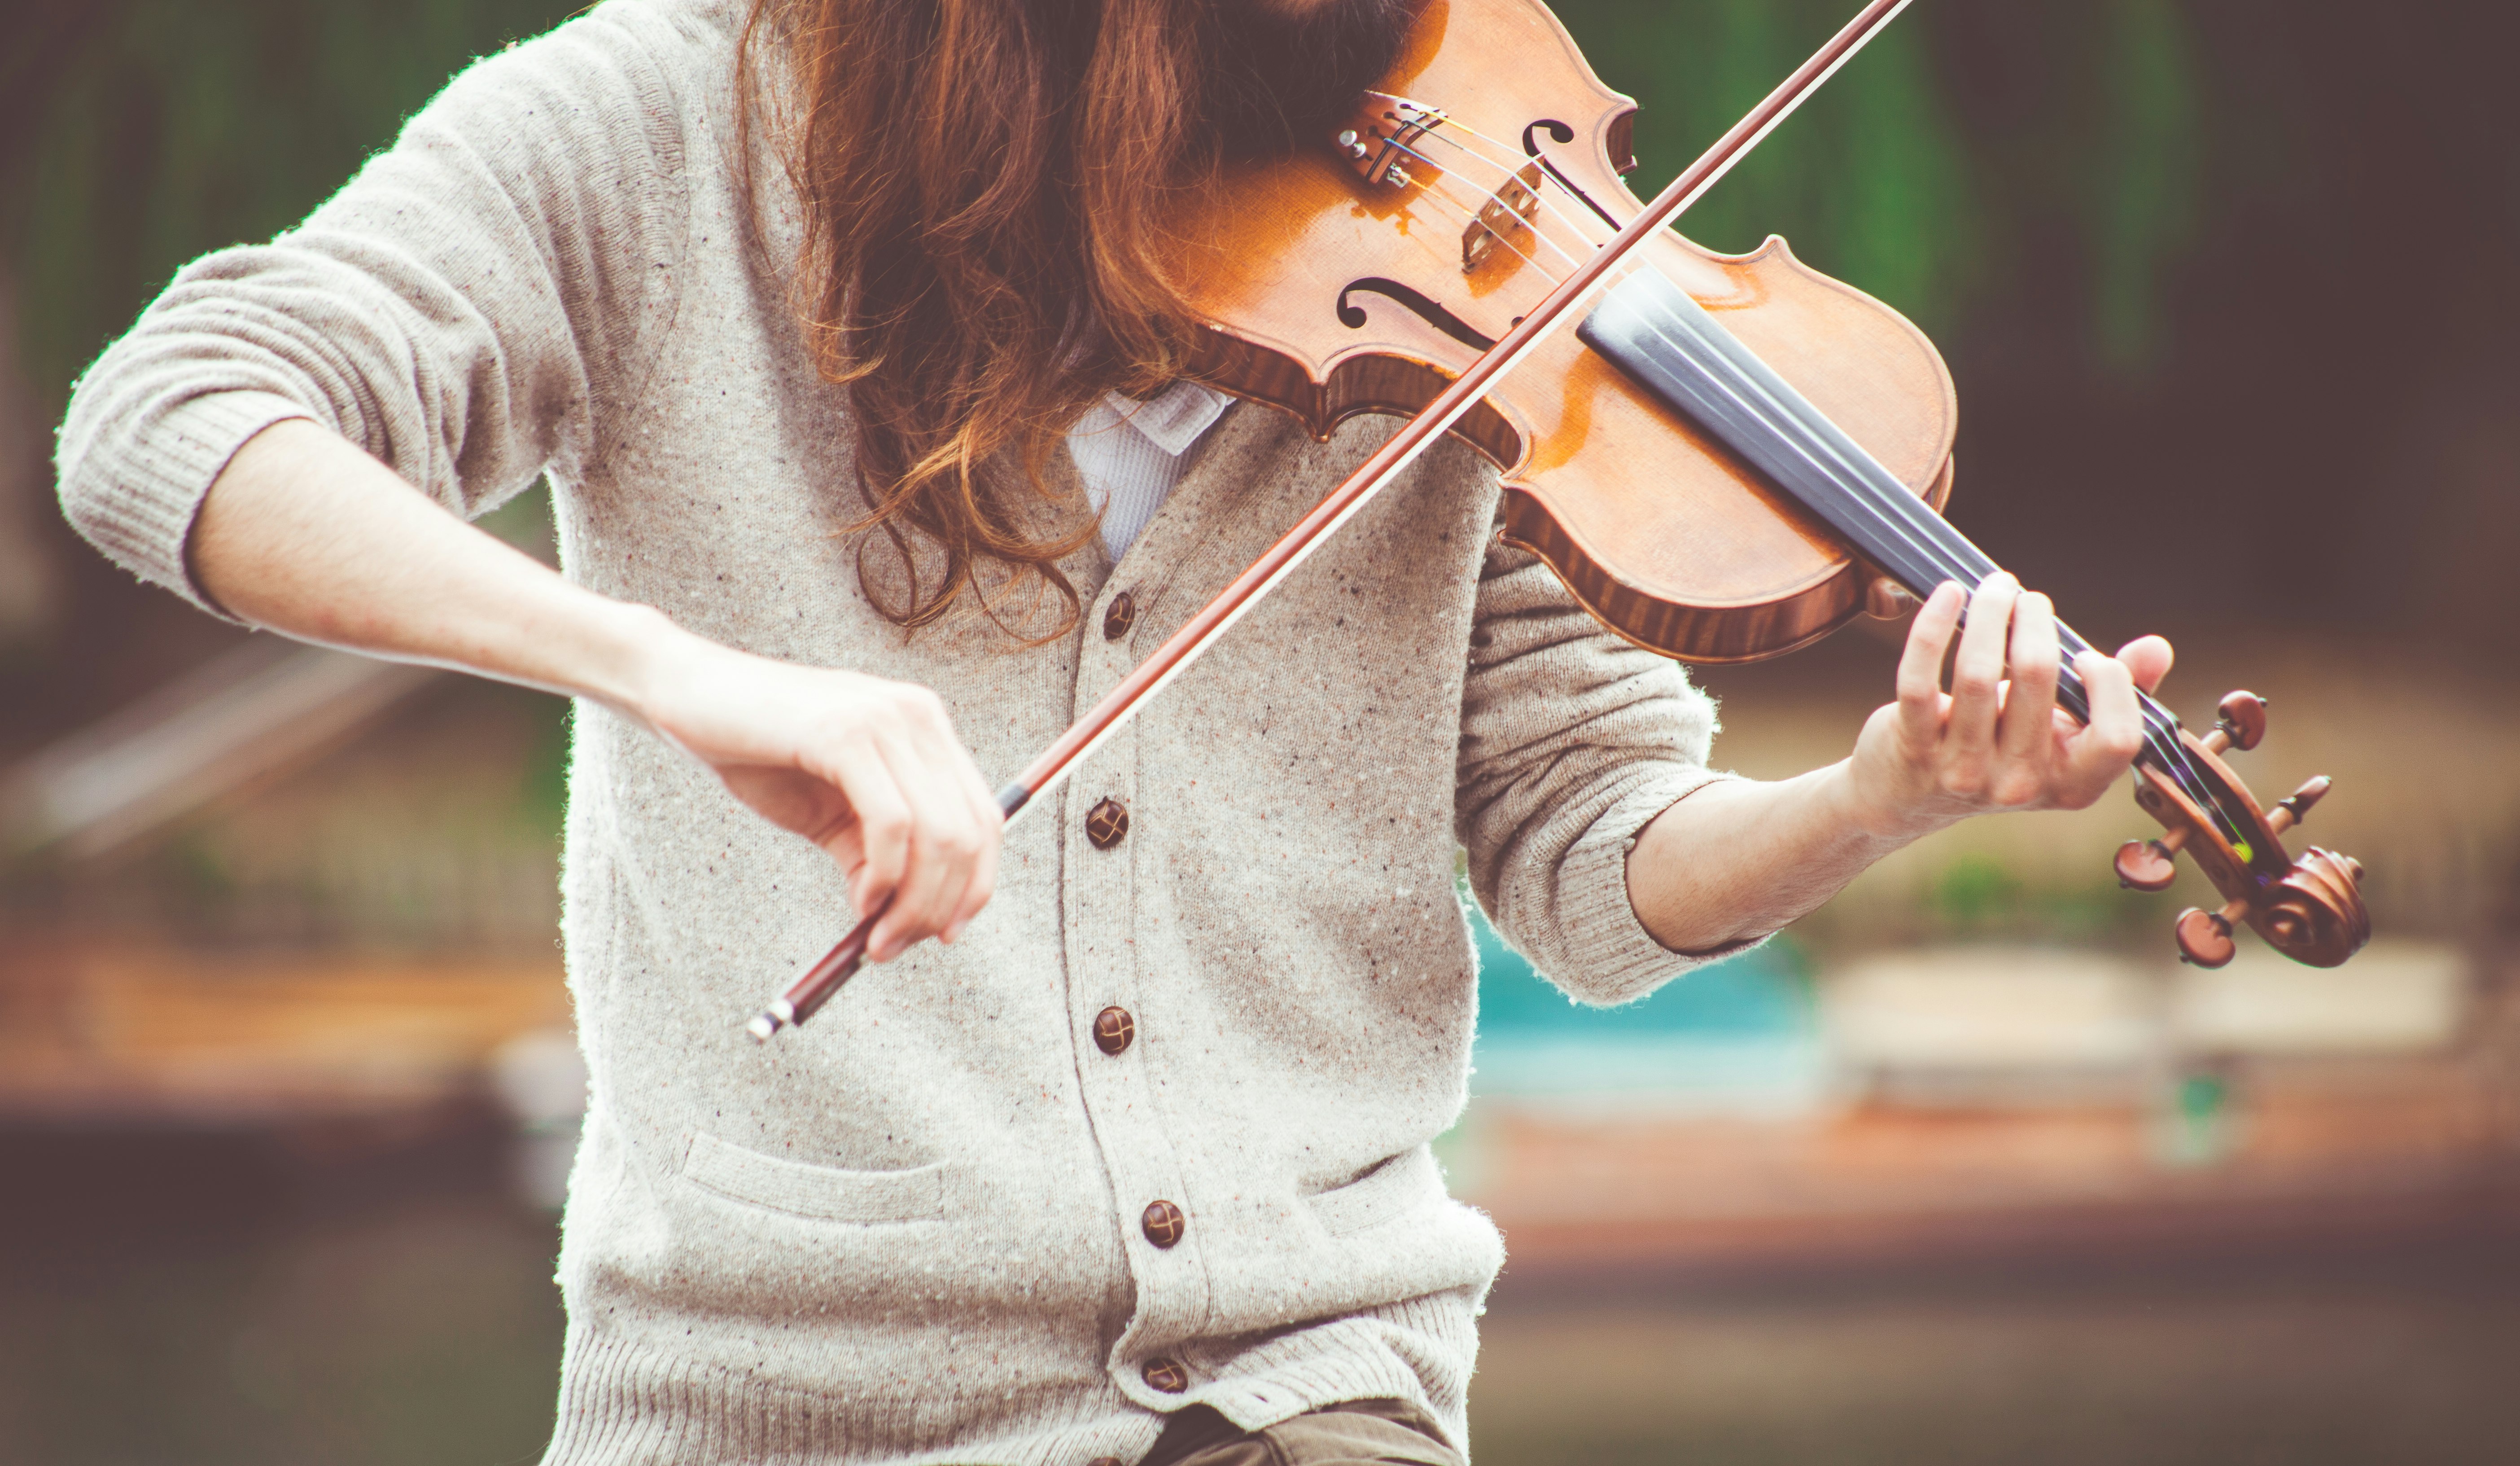 Outdoors violinist in a sweater